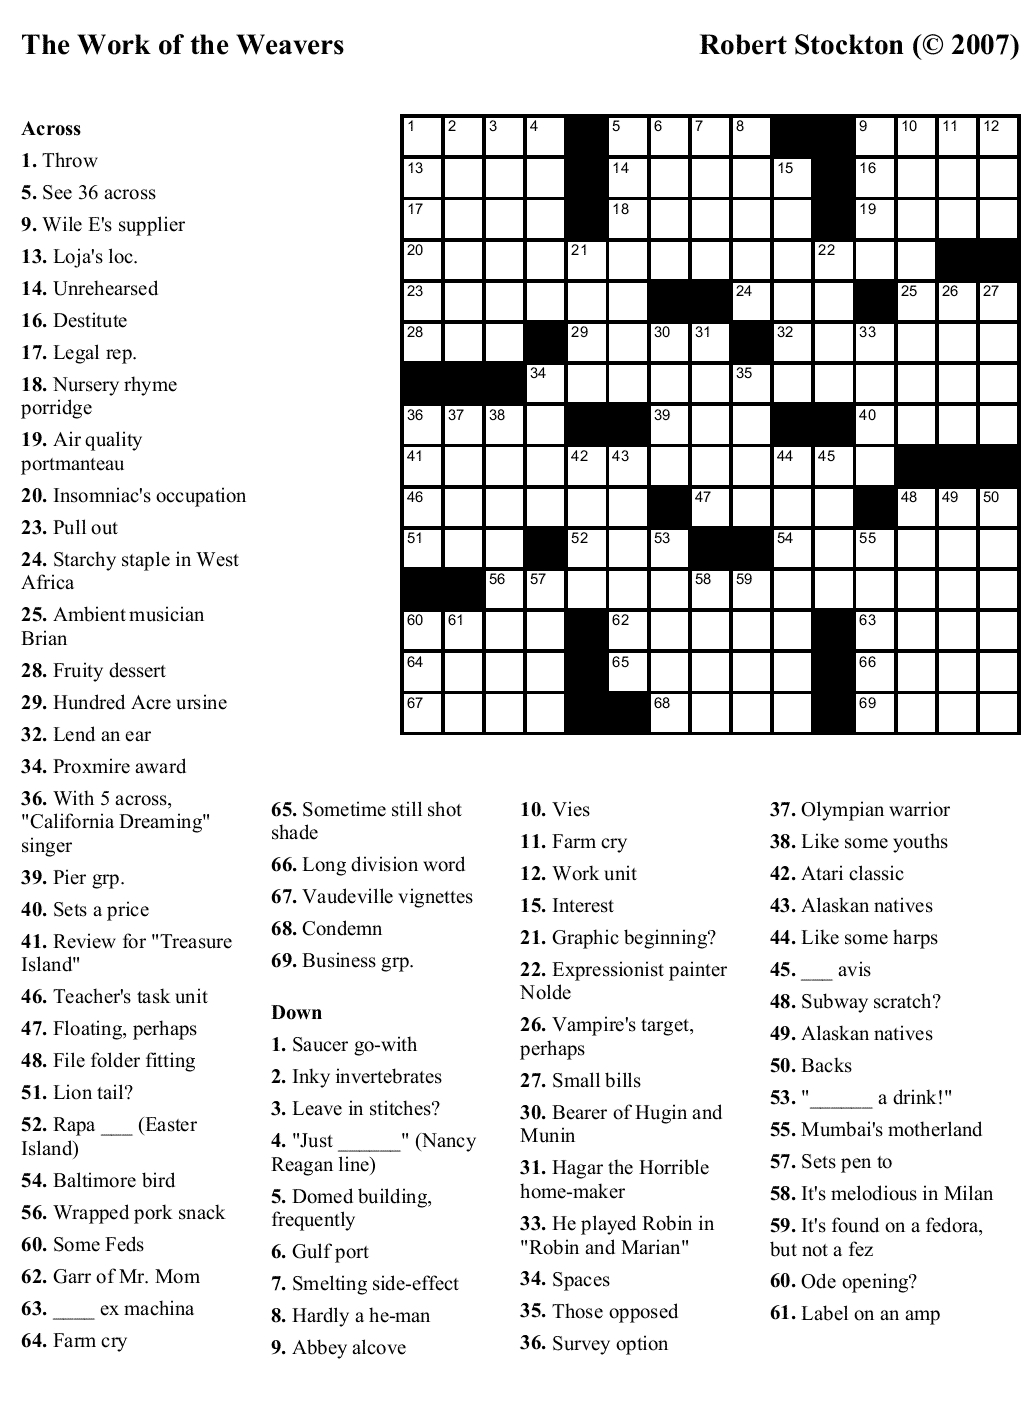 Coloring ~ Coloring Free Large Print Crosswords Easy For Seniors - Printable Thomas Joseph Crossword Puzzle For Today